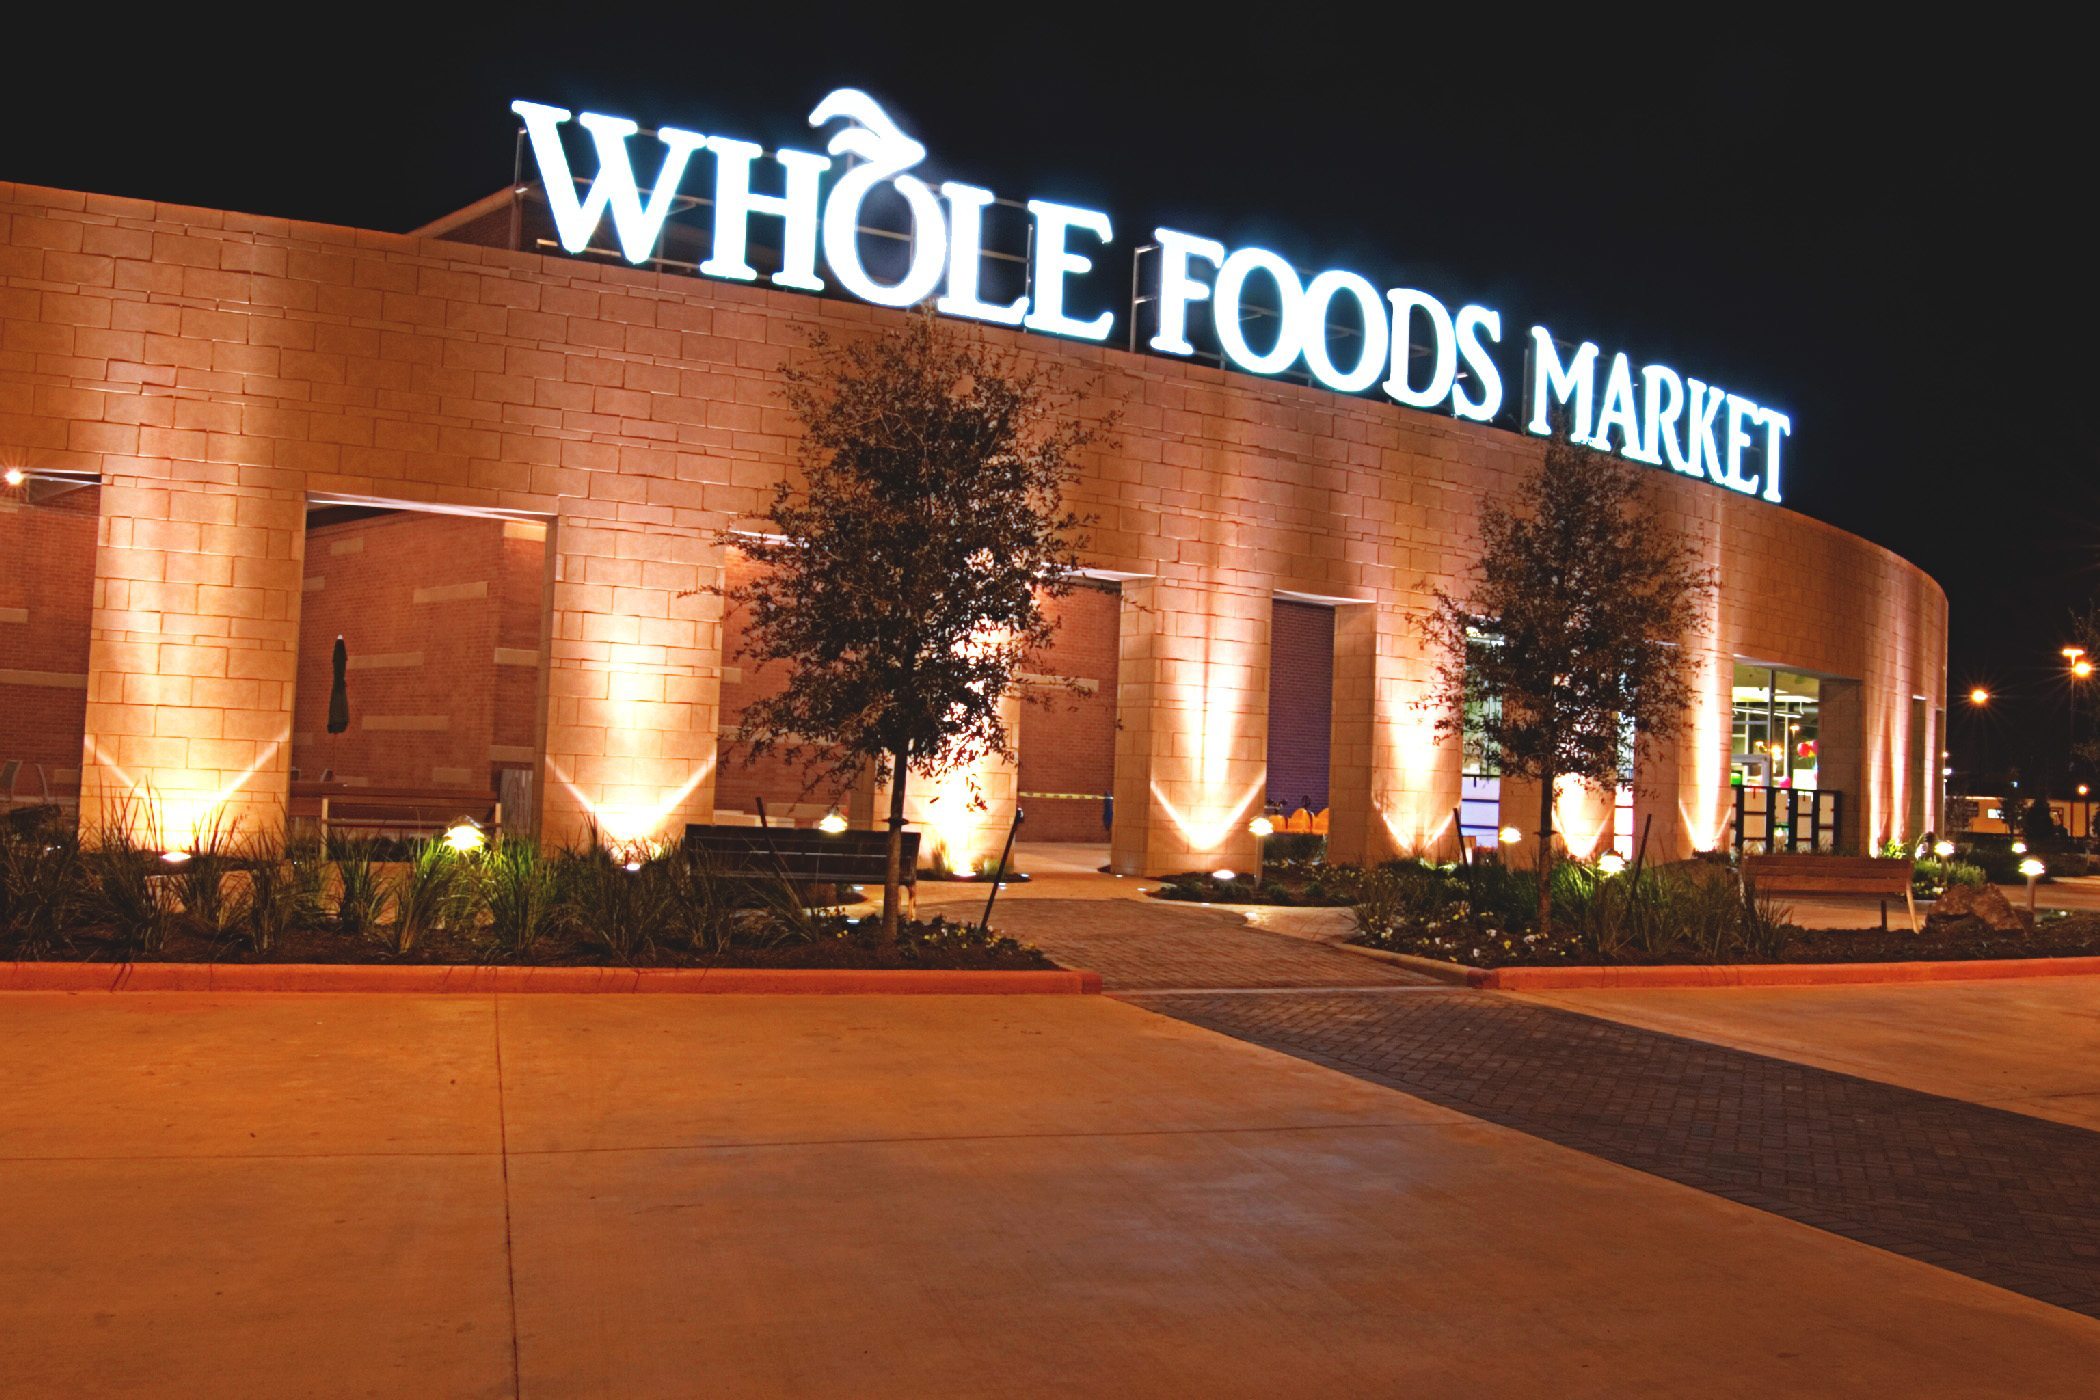 Whole-Foods-Market-Sugarland-TX_FEAT-1